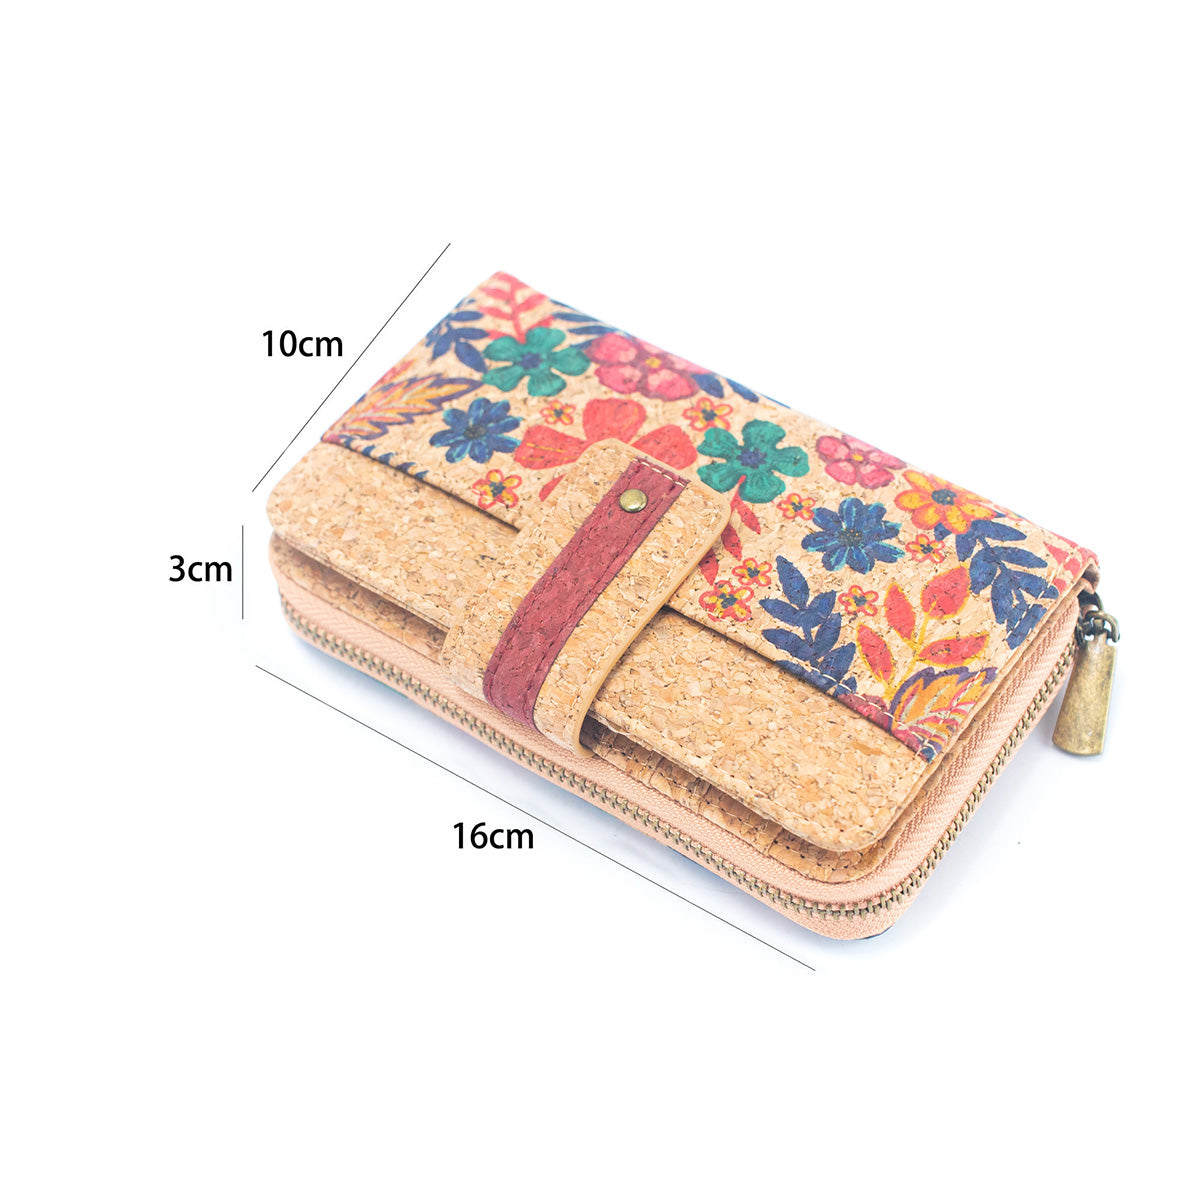 Cork Women's Rose&Plant Card Holder Wallet | THE CORK COLLECTION